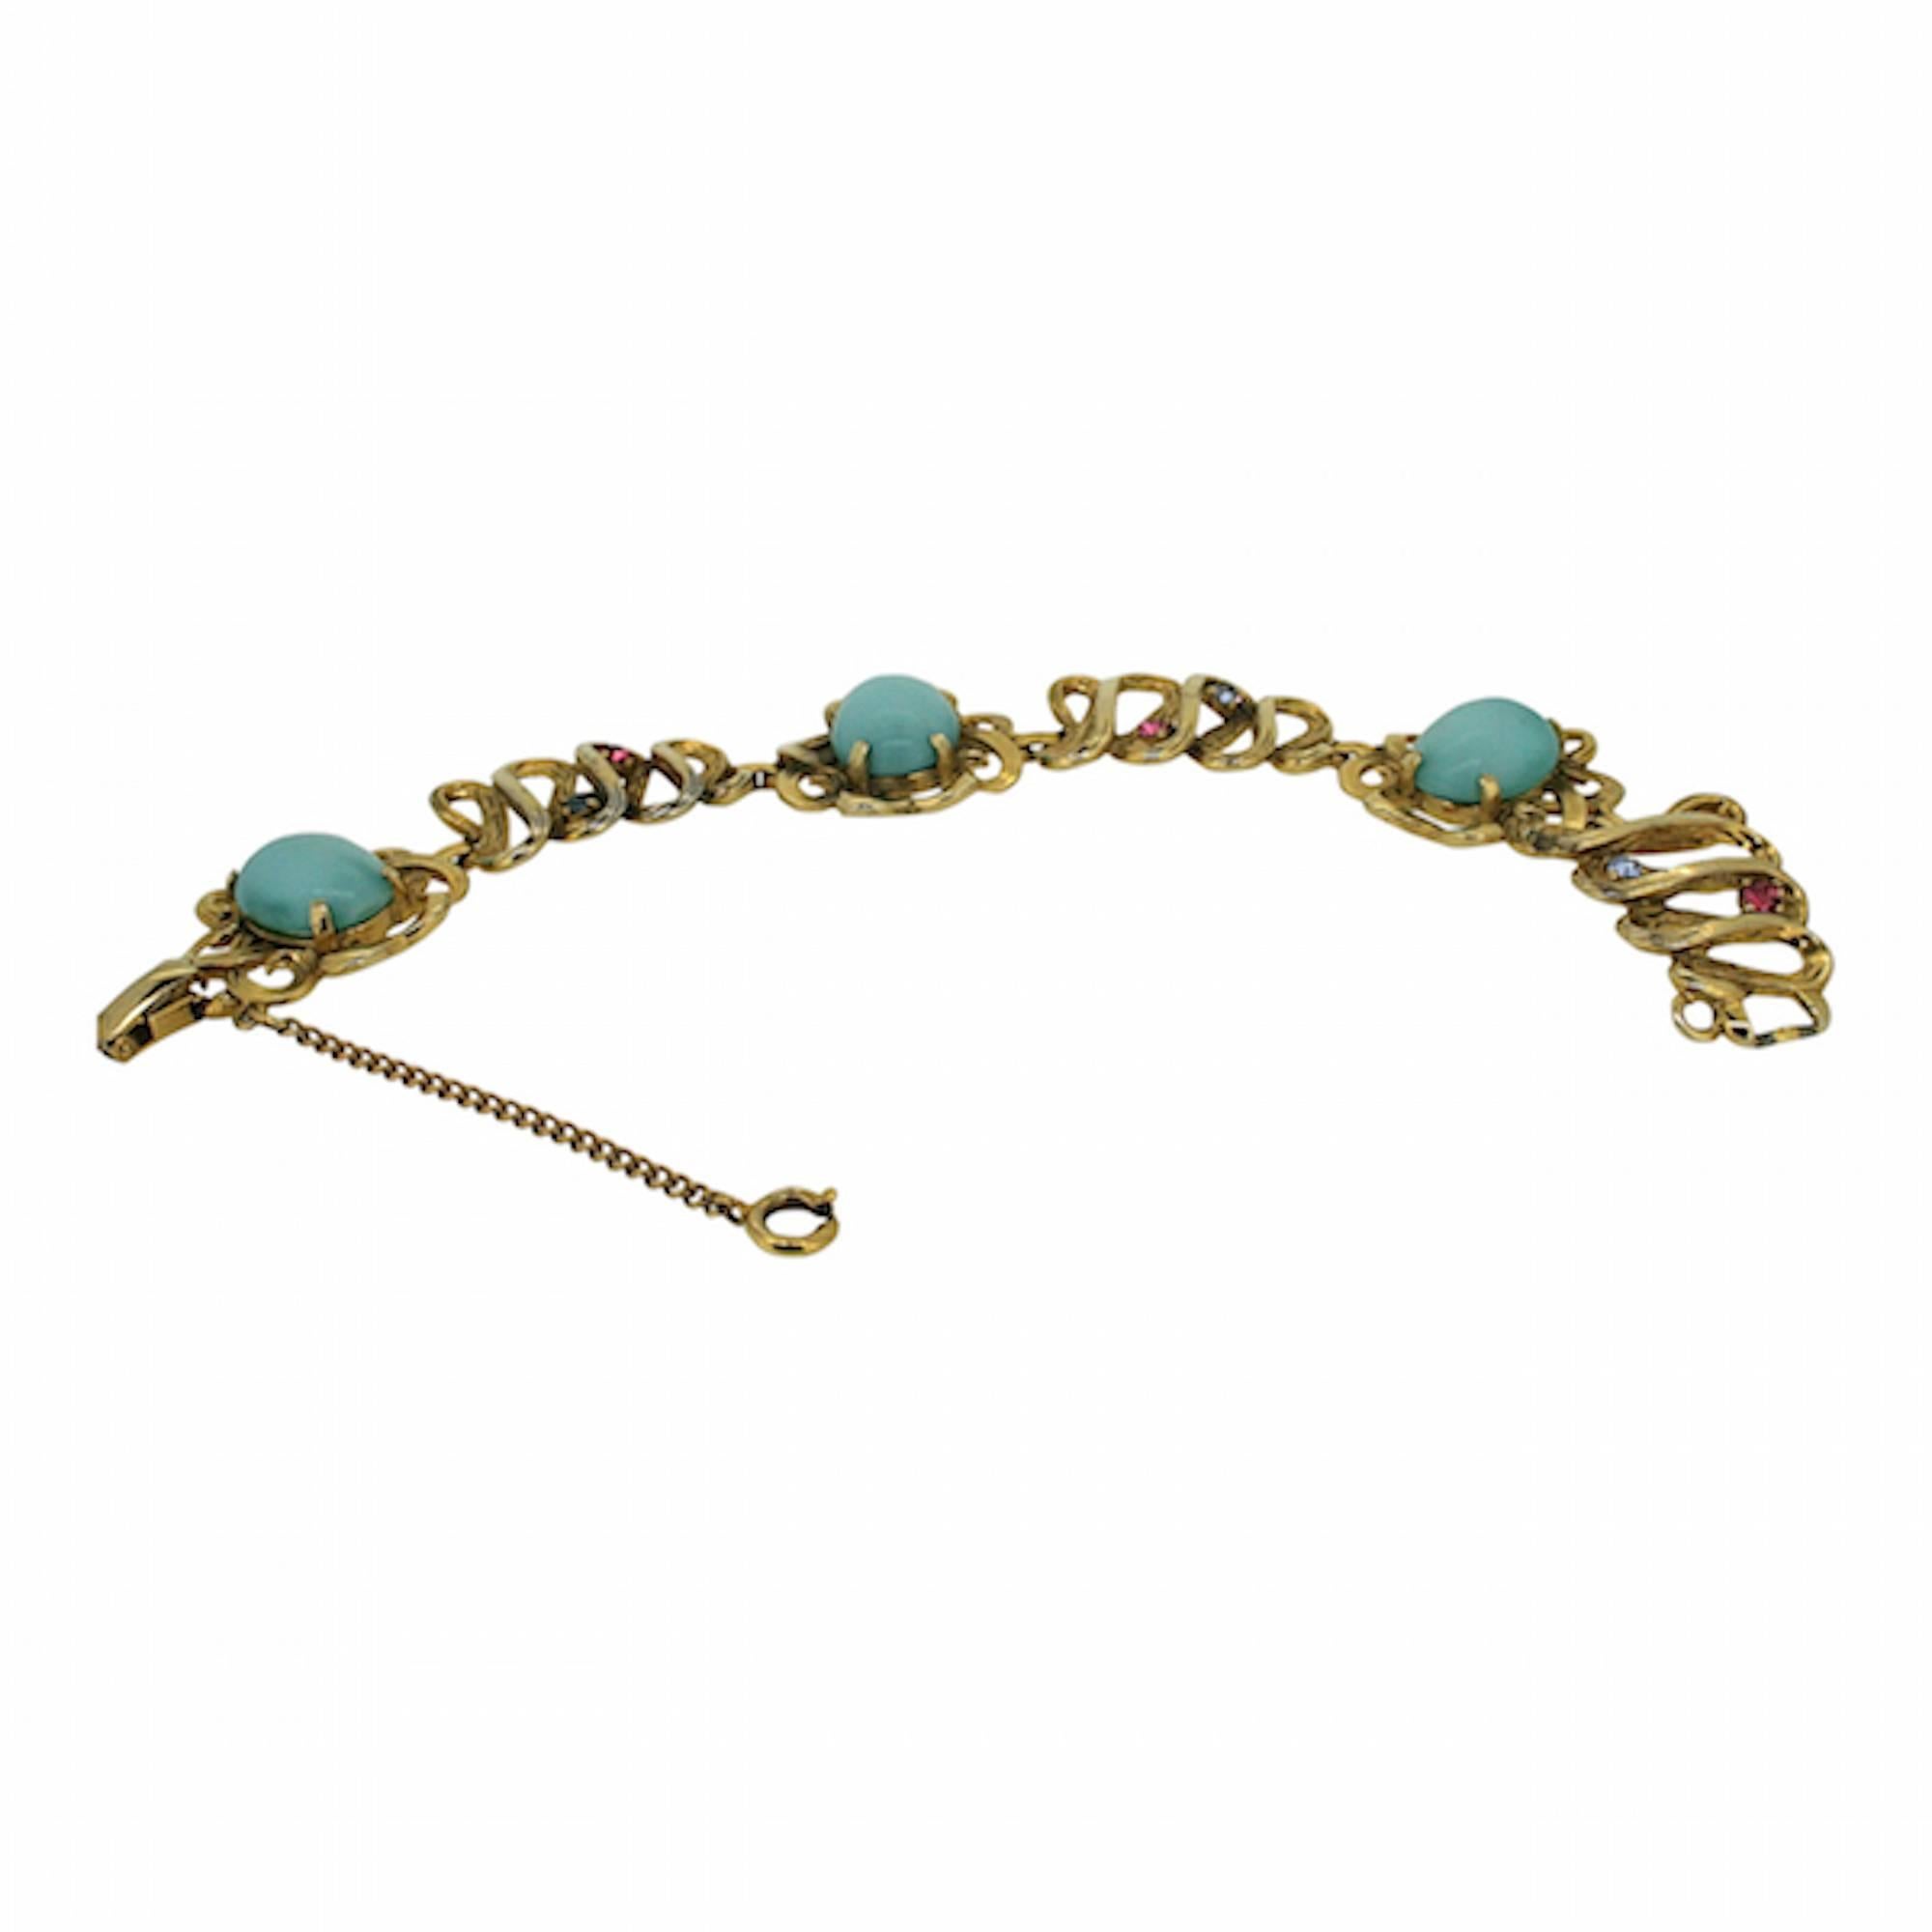 A beautiful bracelet by a much sought after maker of costume jewellery. This piece dates from the early 1950s and was created by Elsa Schiaparelli. 

Condition Report:
Very Good - Some very minor wear to the gilt metal surface in a couple of places.